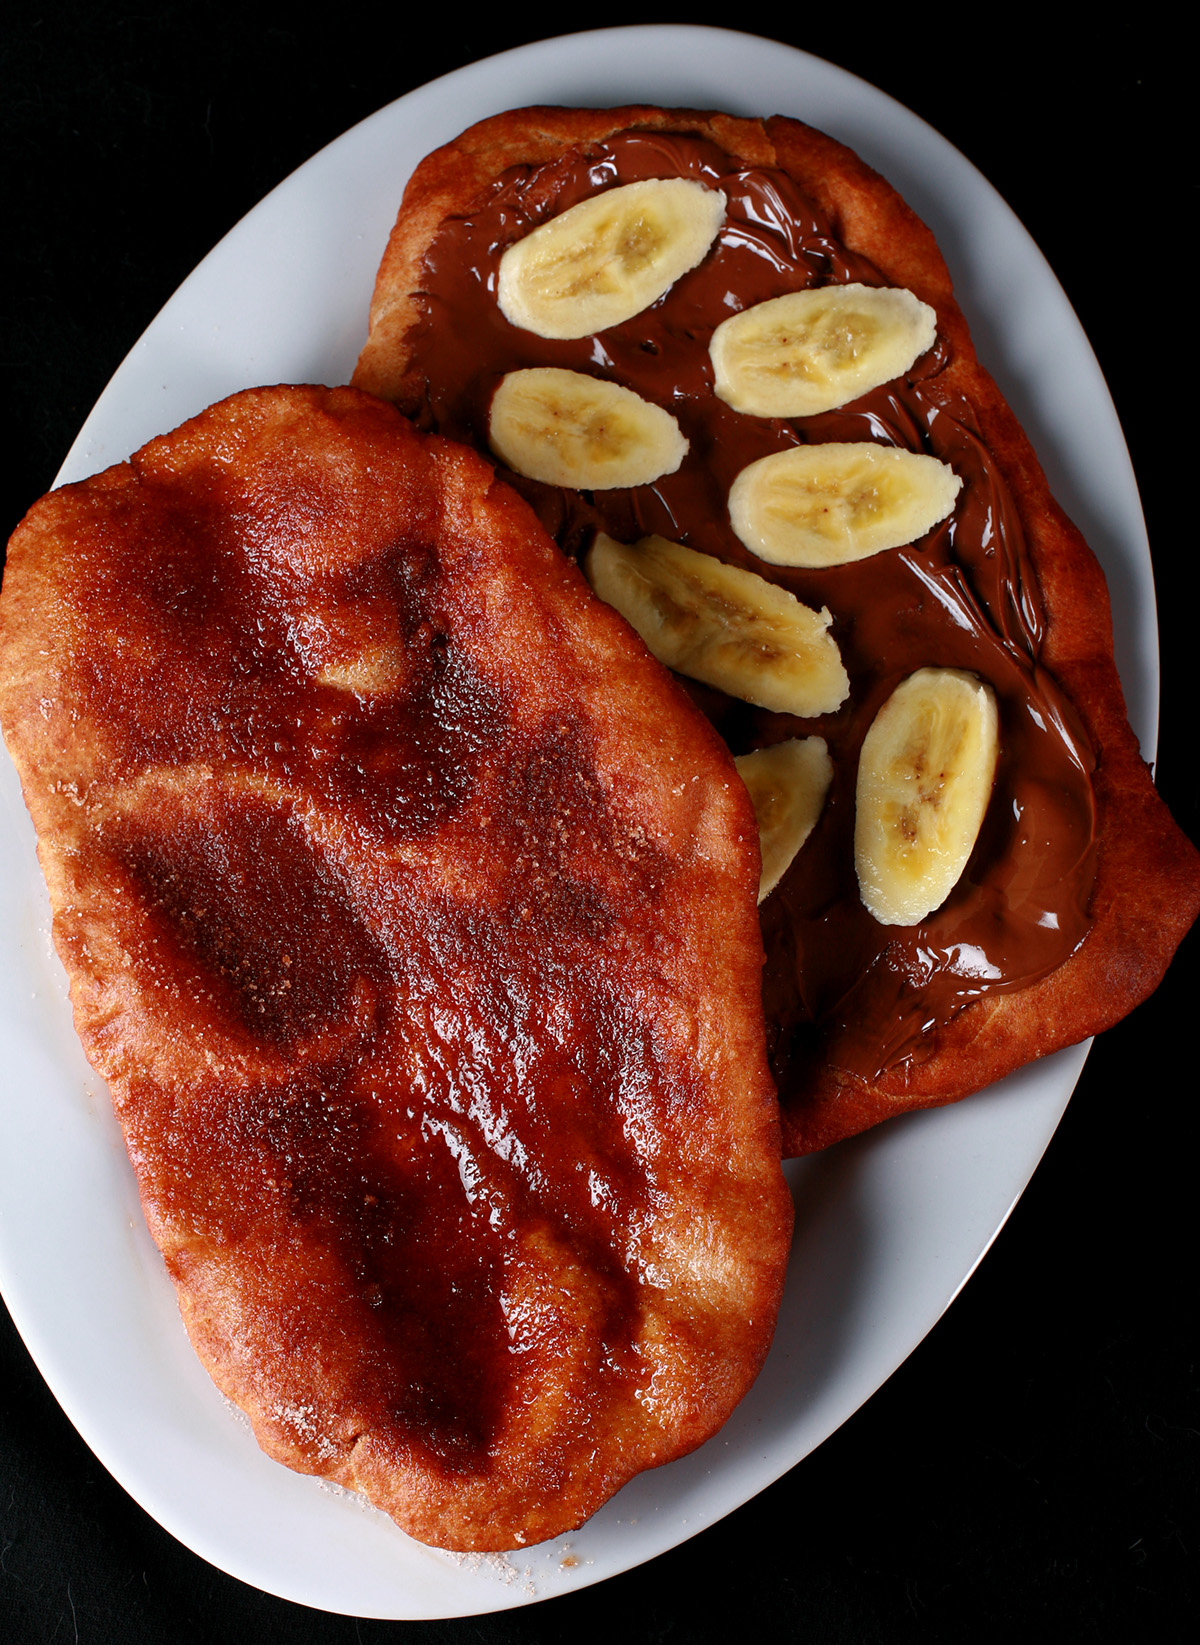 Two gluten-free fried pastries - made from this Gluten-free Beaver Tail recipe - are arranged on a plate. Both are oblong pieces of fried dough. One is topped with cinnamon sugar, the other is spread with Nutella and topped with sliced banana.